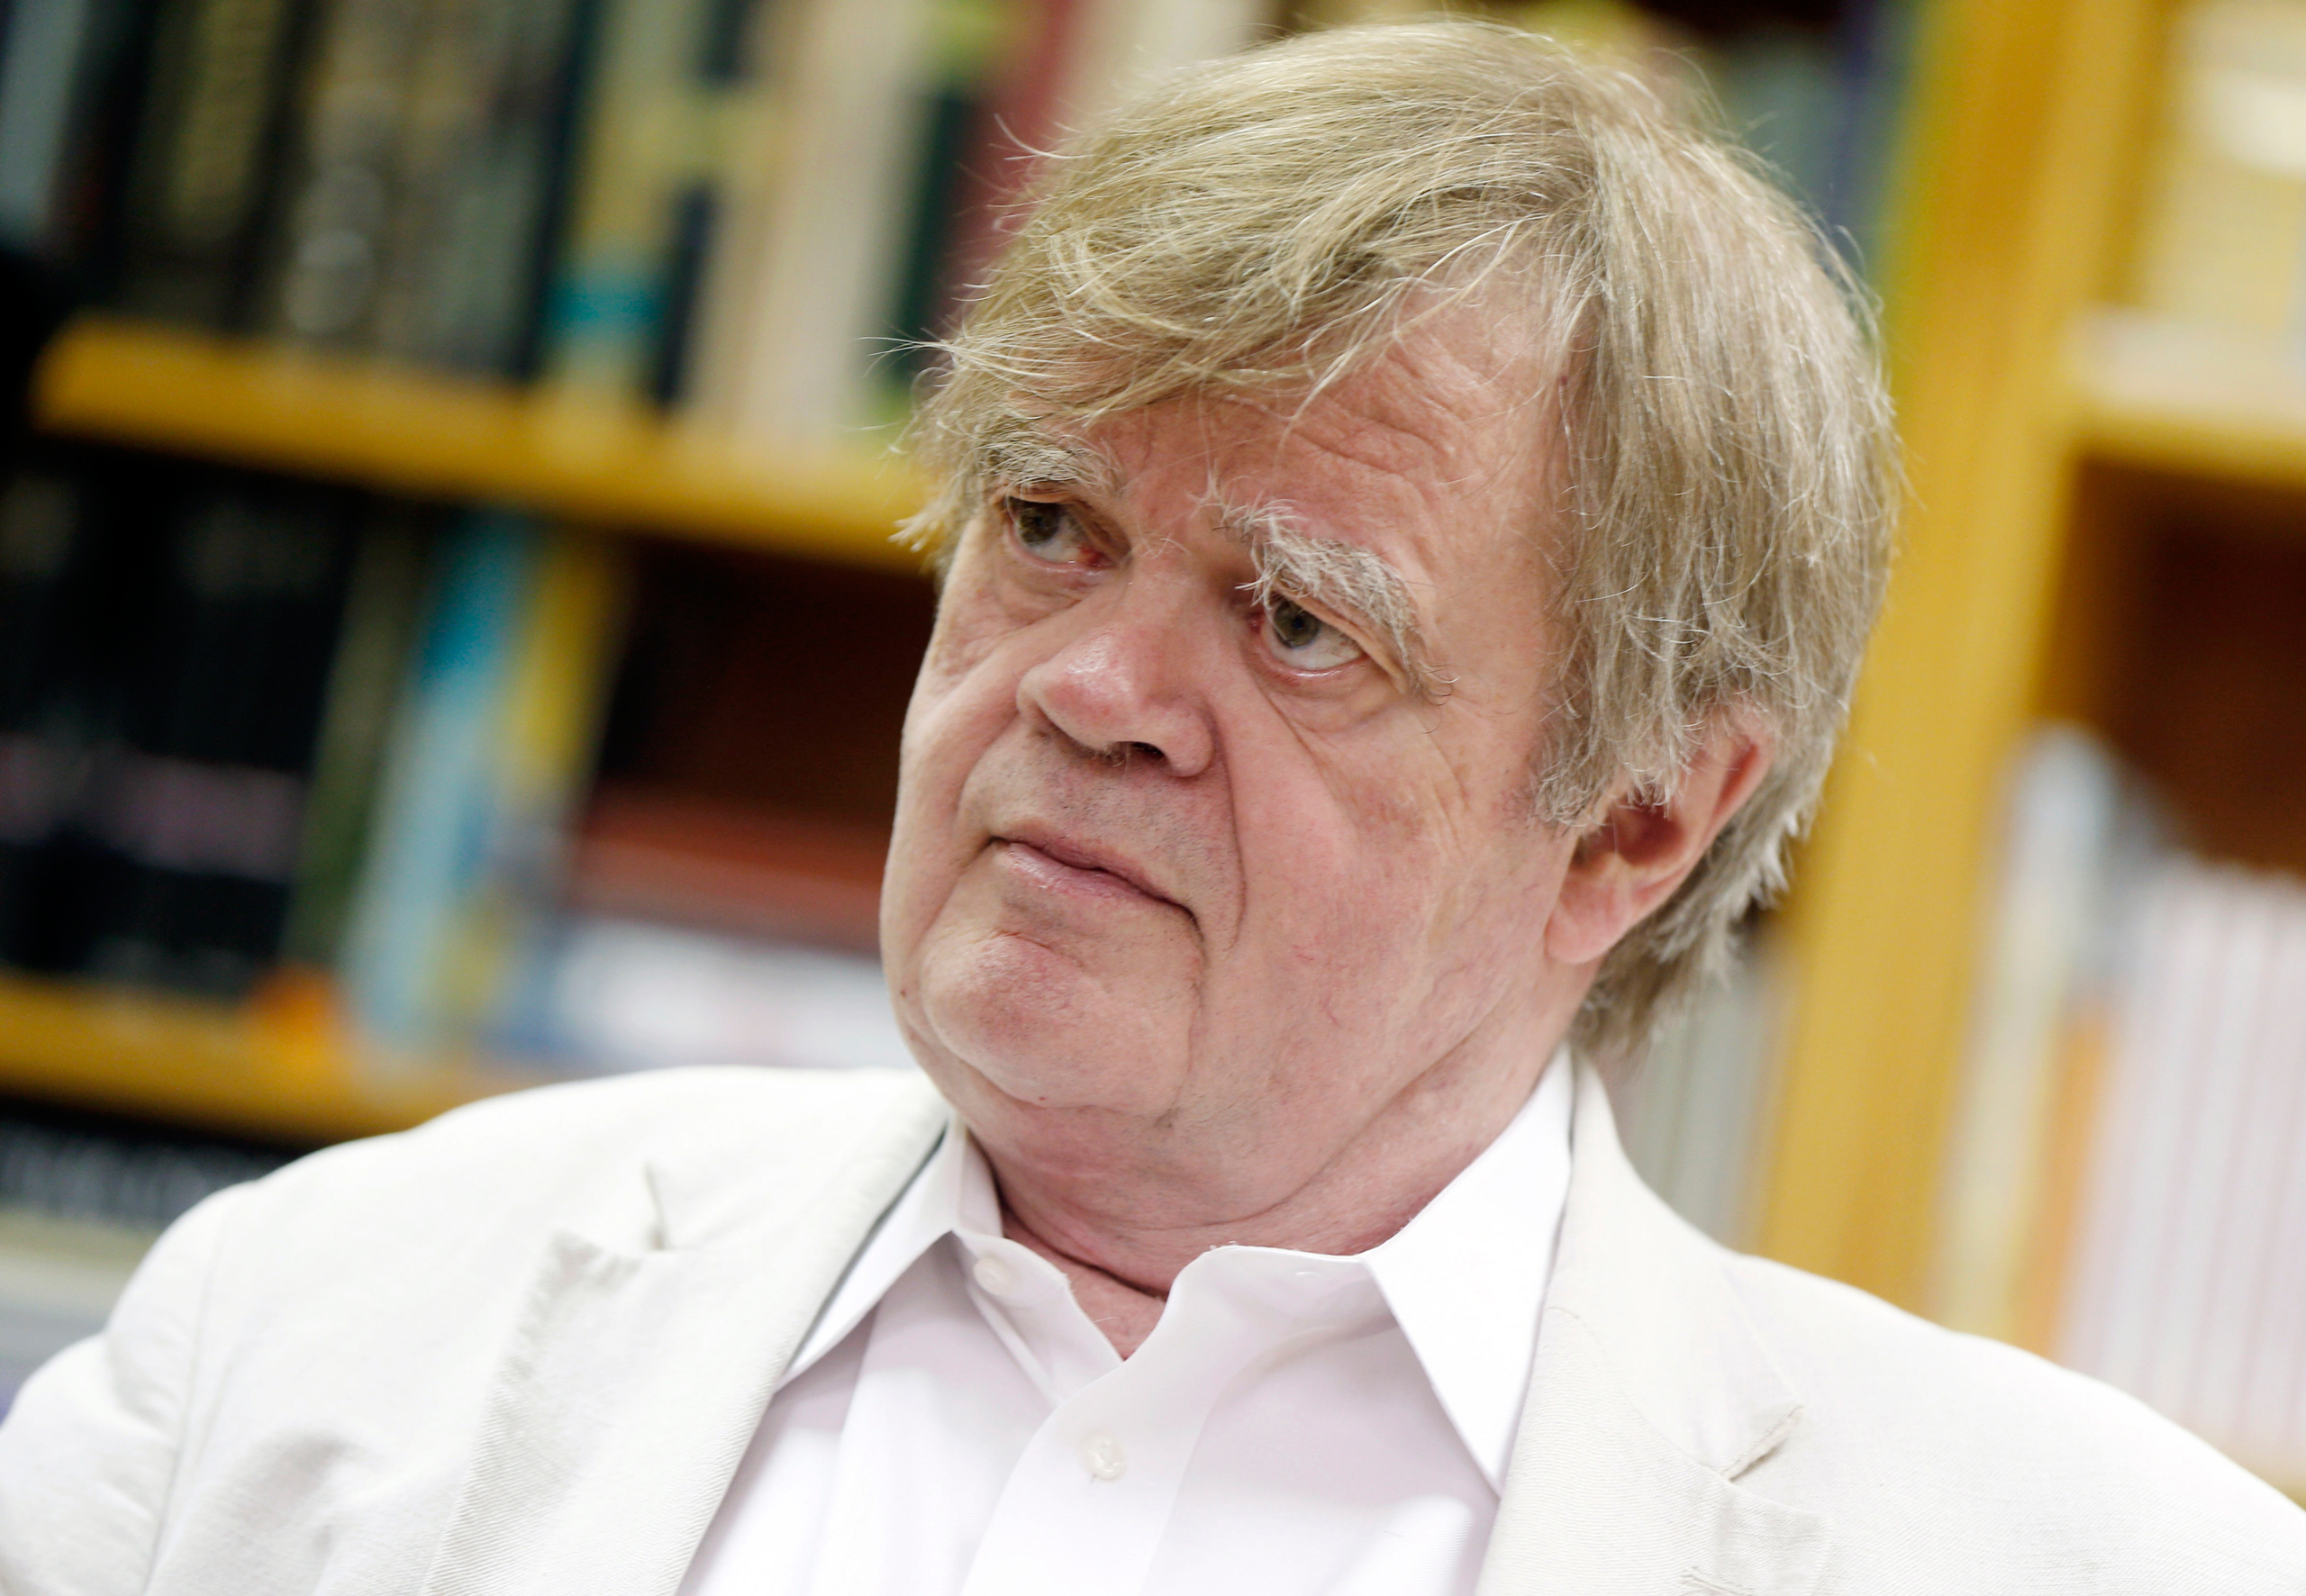 Garrison Keillor, creator and host of "A Prairie Home Companion, in an interview by The Associated Press in St. Paul, Minn., on July 20, 2015. (Jim Mone—AP)